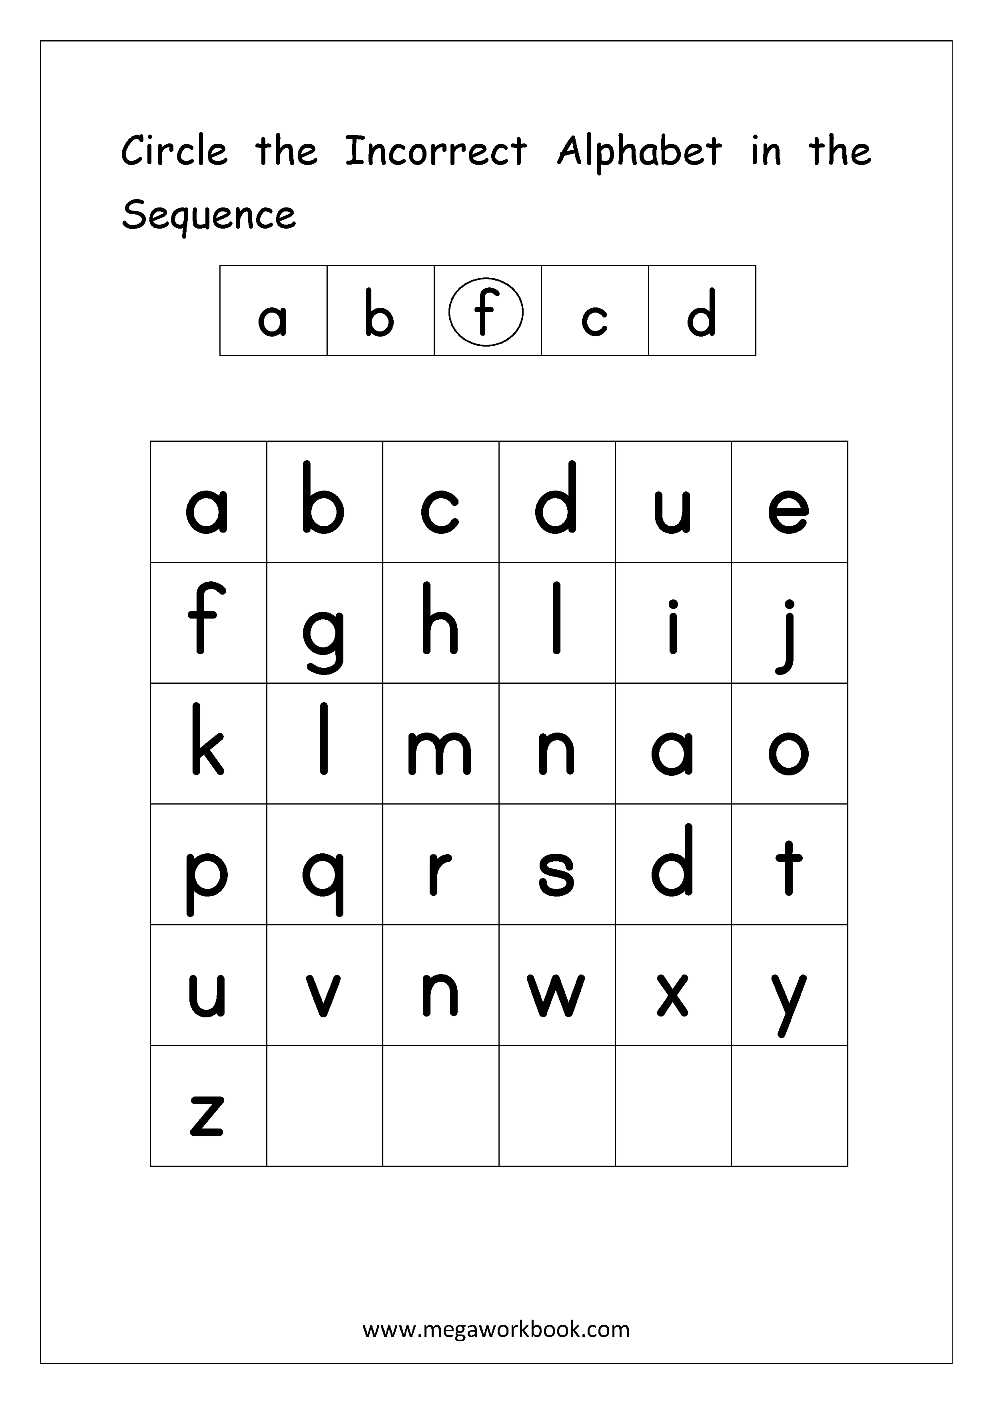 English Worksheets - Alphabetical Sequence | Letter with regard to Letter Order Worksheets